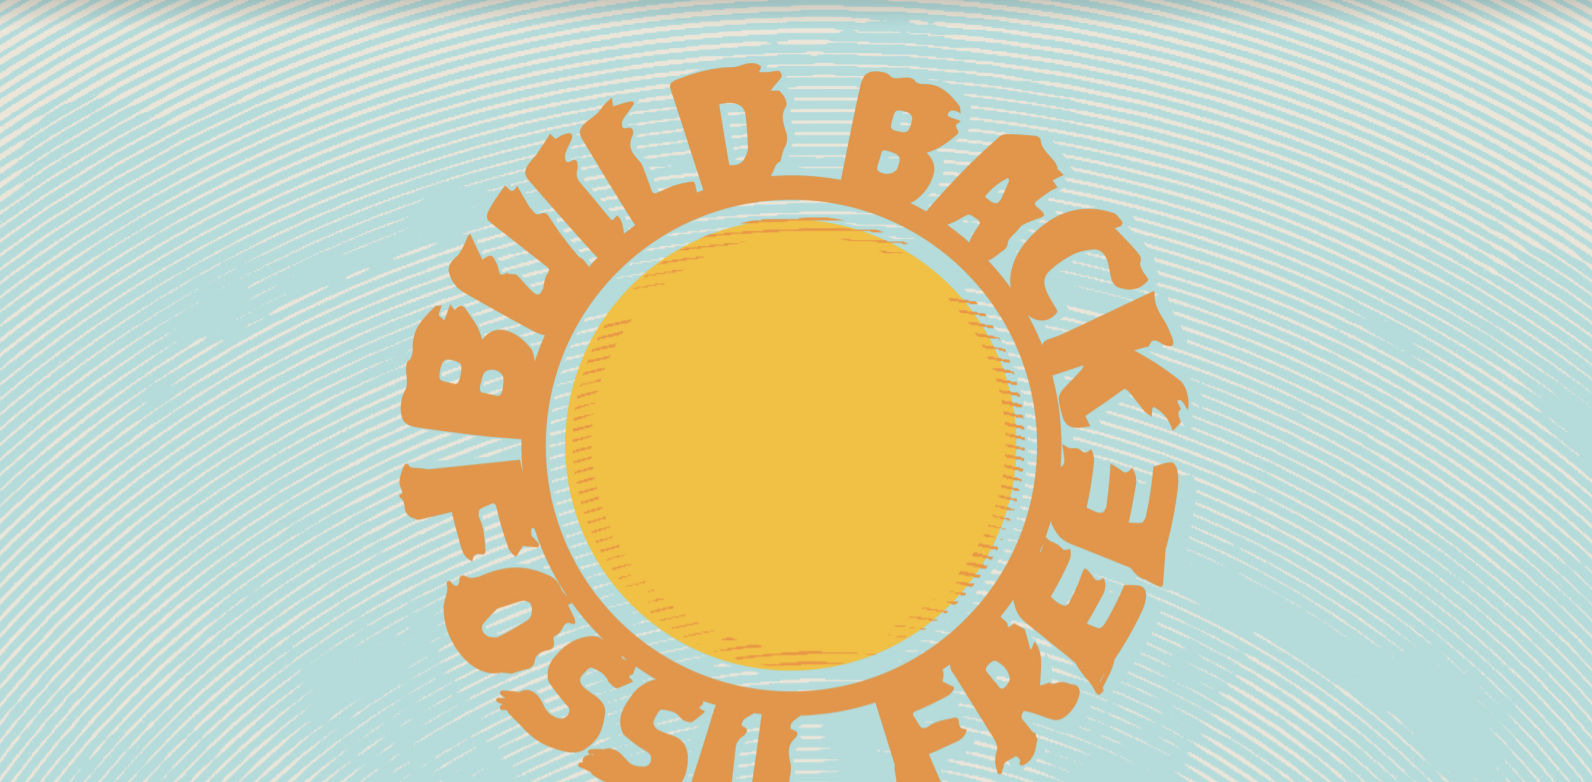 Build back fossil free around a sun